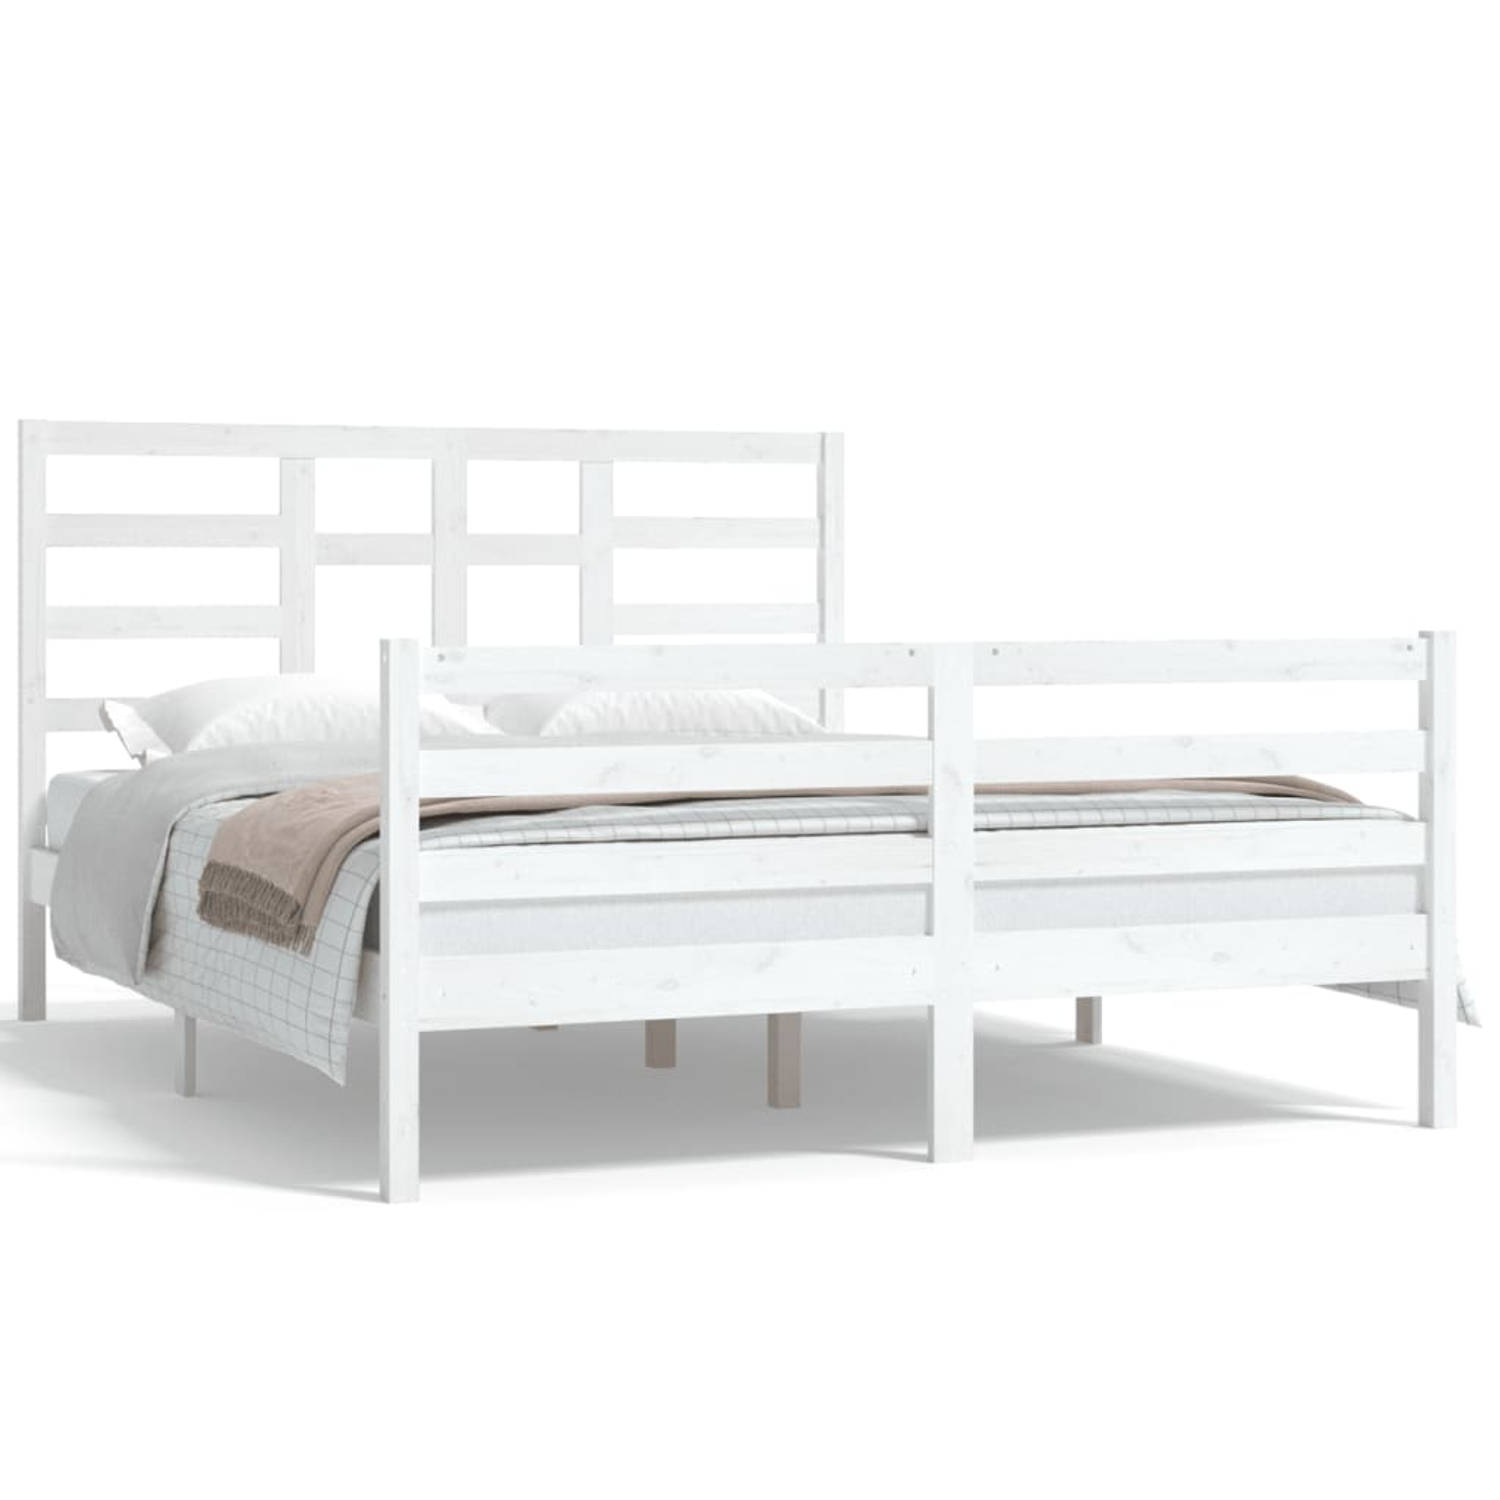 The Living Store Bedframe massief hout wit 150x200 cm 5FT King Size - Bedframe - Bedframes - Bed - Bedbodem - Ledikant - Bed Frame - Massief Houten Bedframe - Slaapmeubel - Tweeper